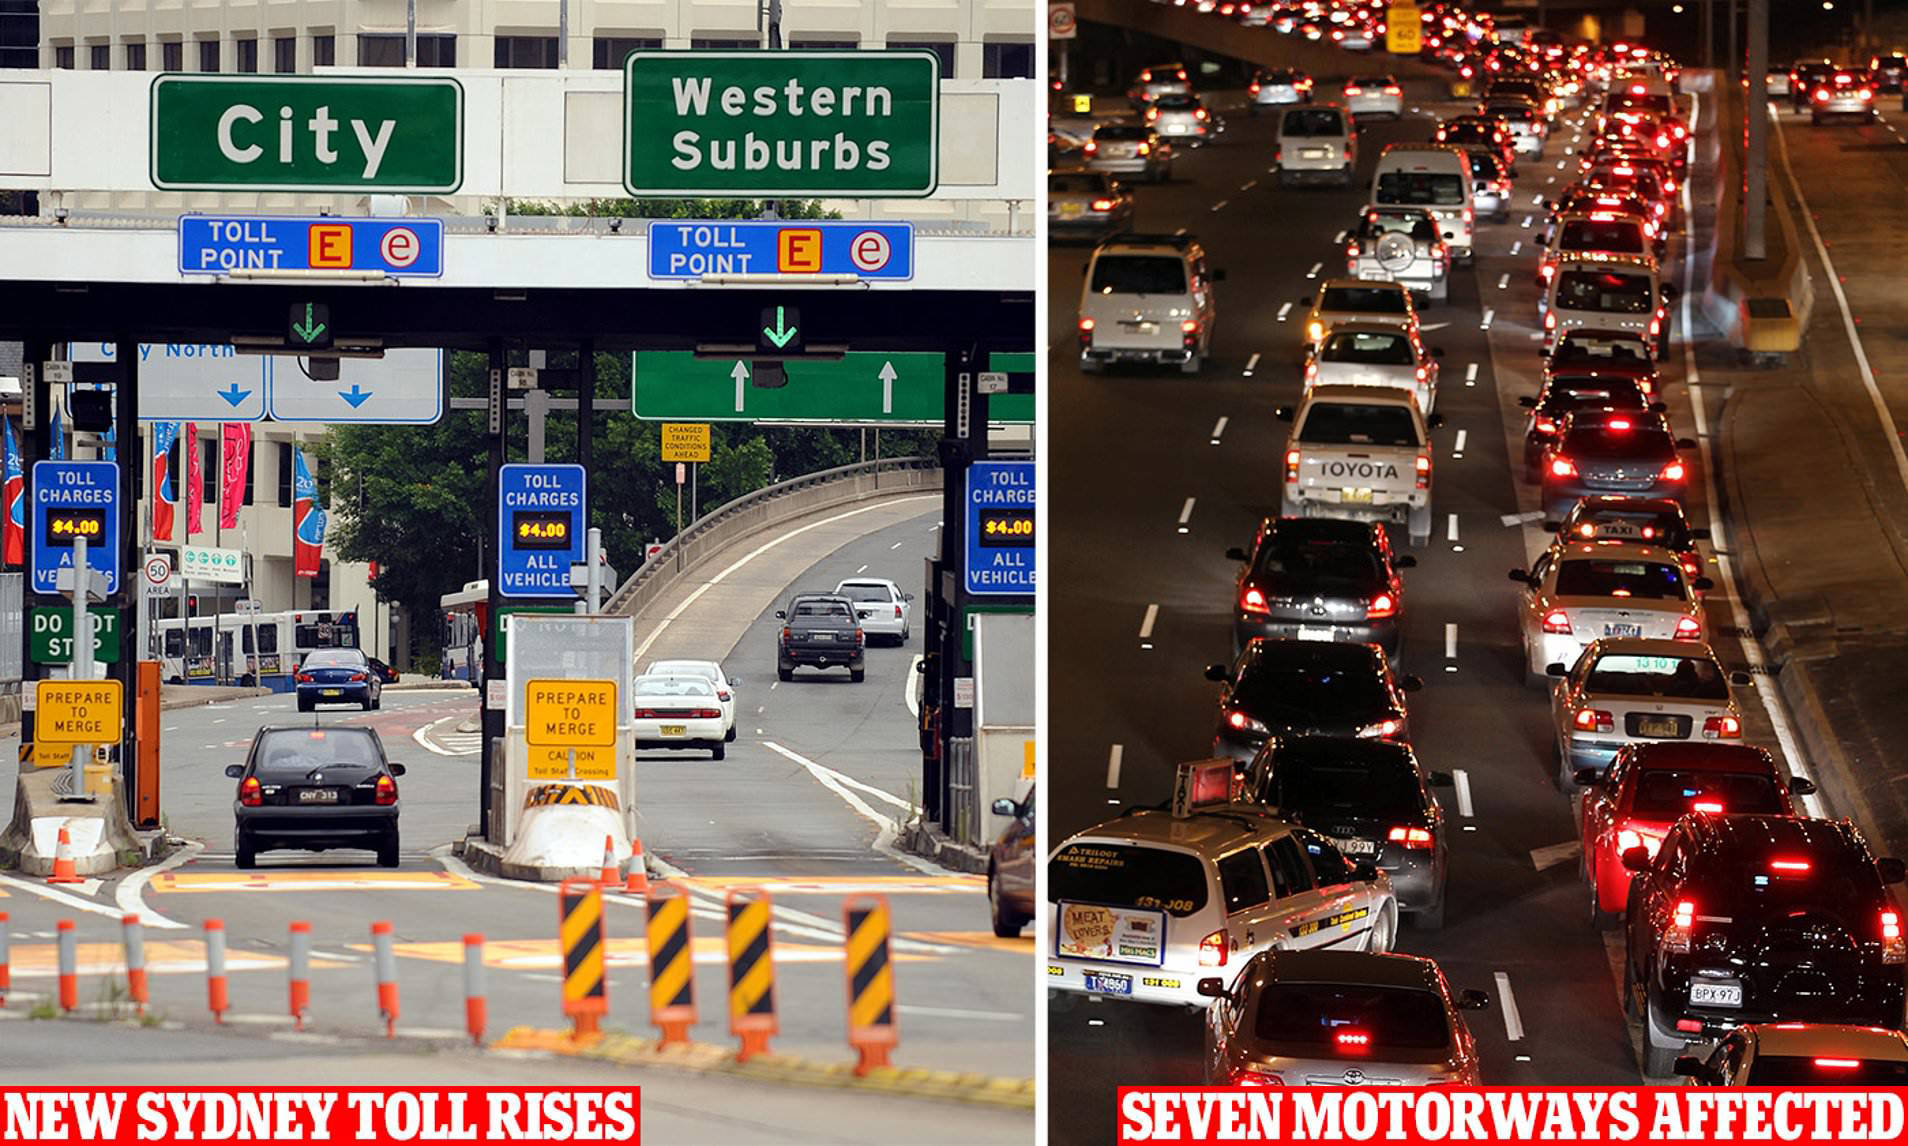 sydney-toll-rise-nsw-tolls-to-increase-commuters-offered-toll-rebate-relief